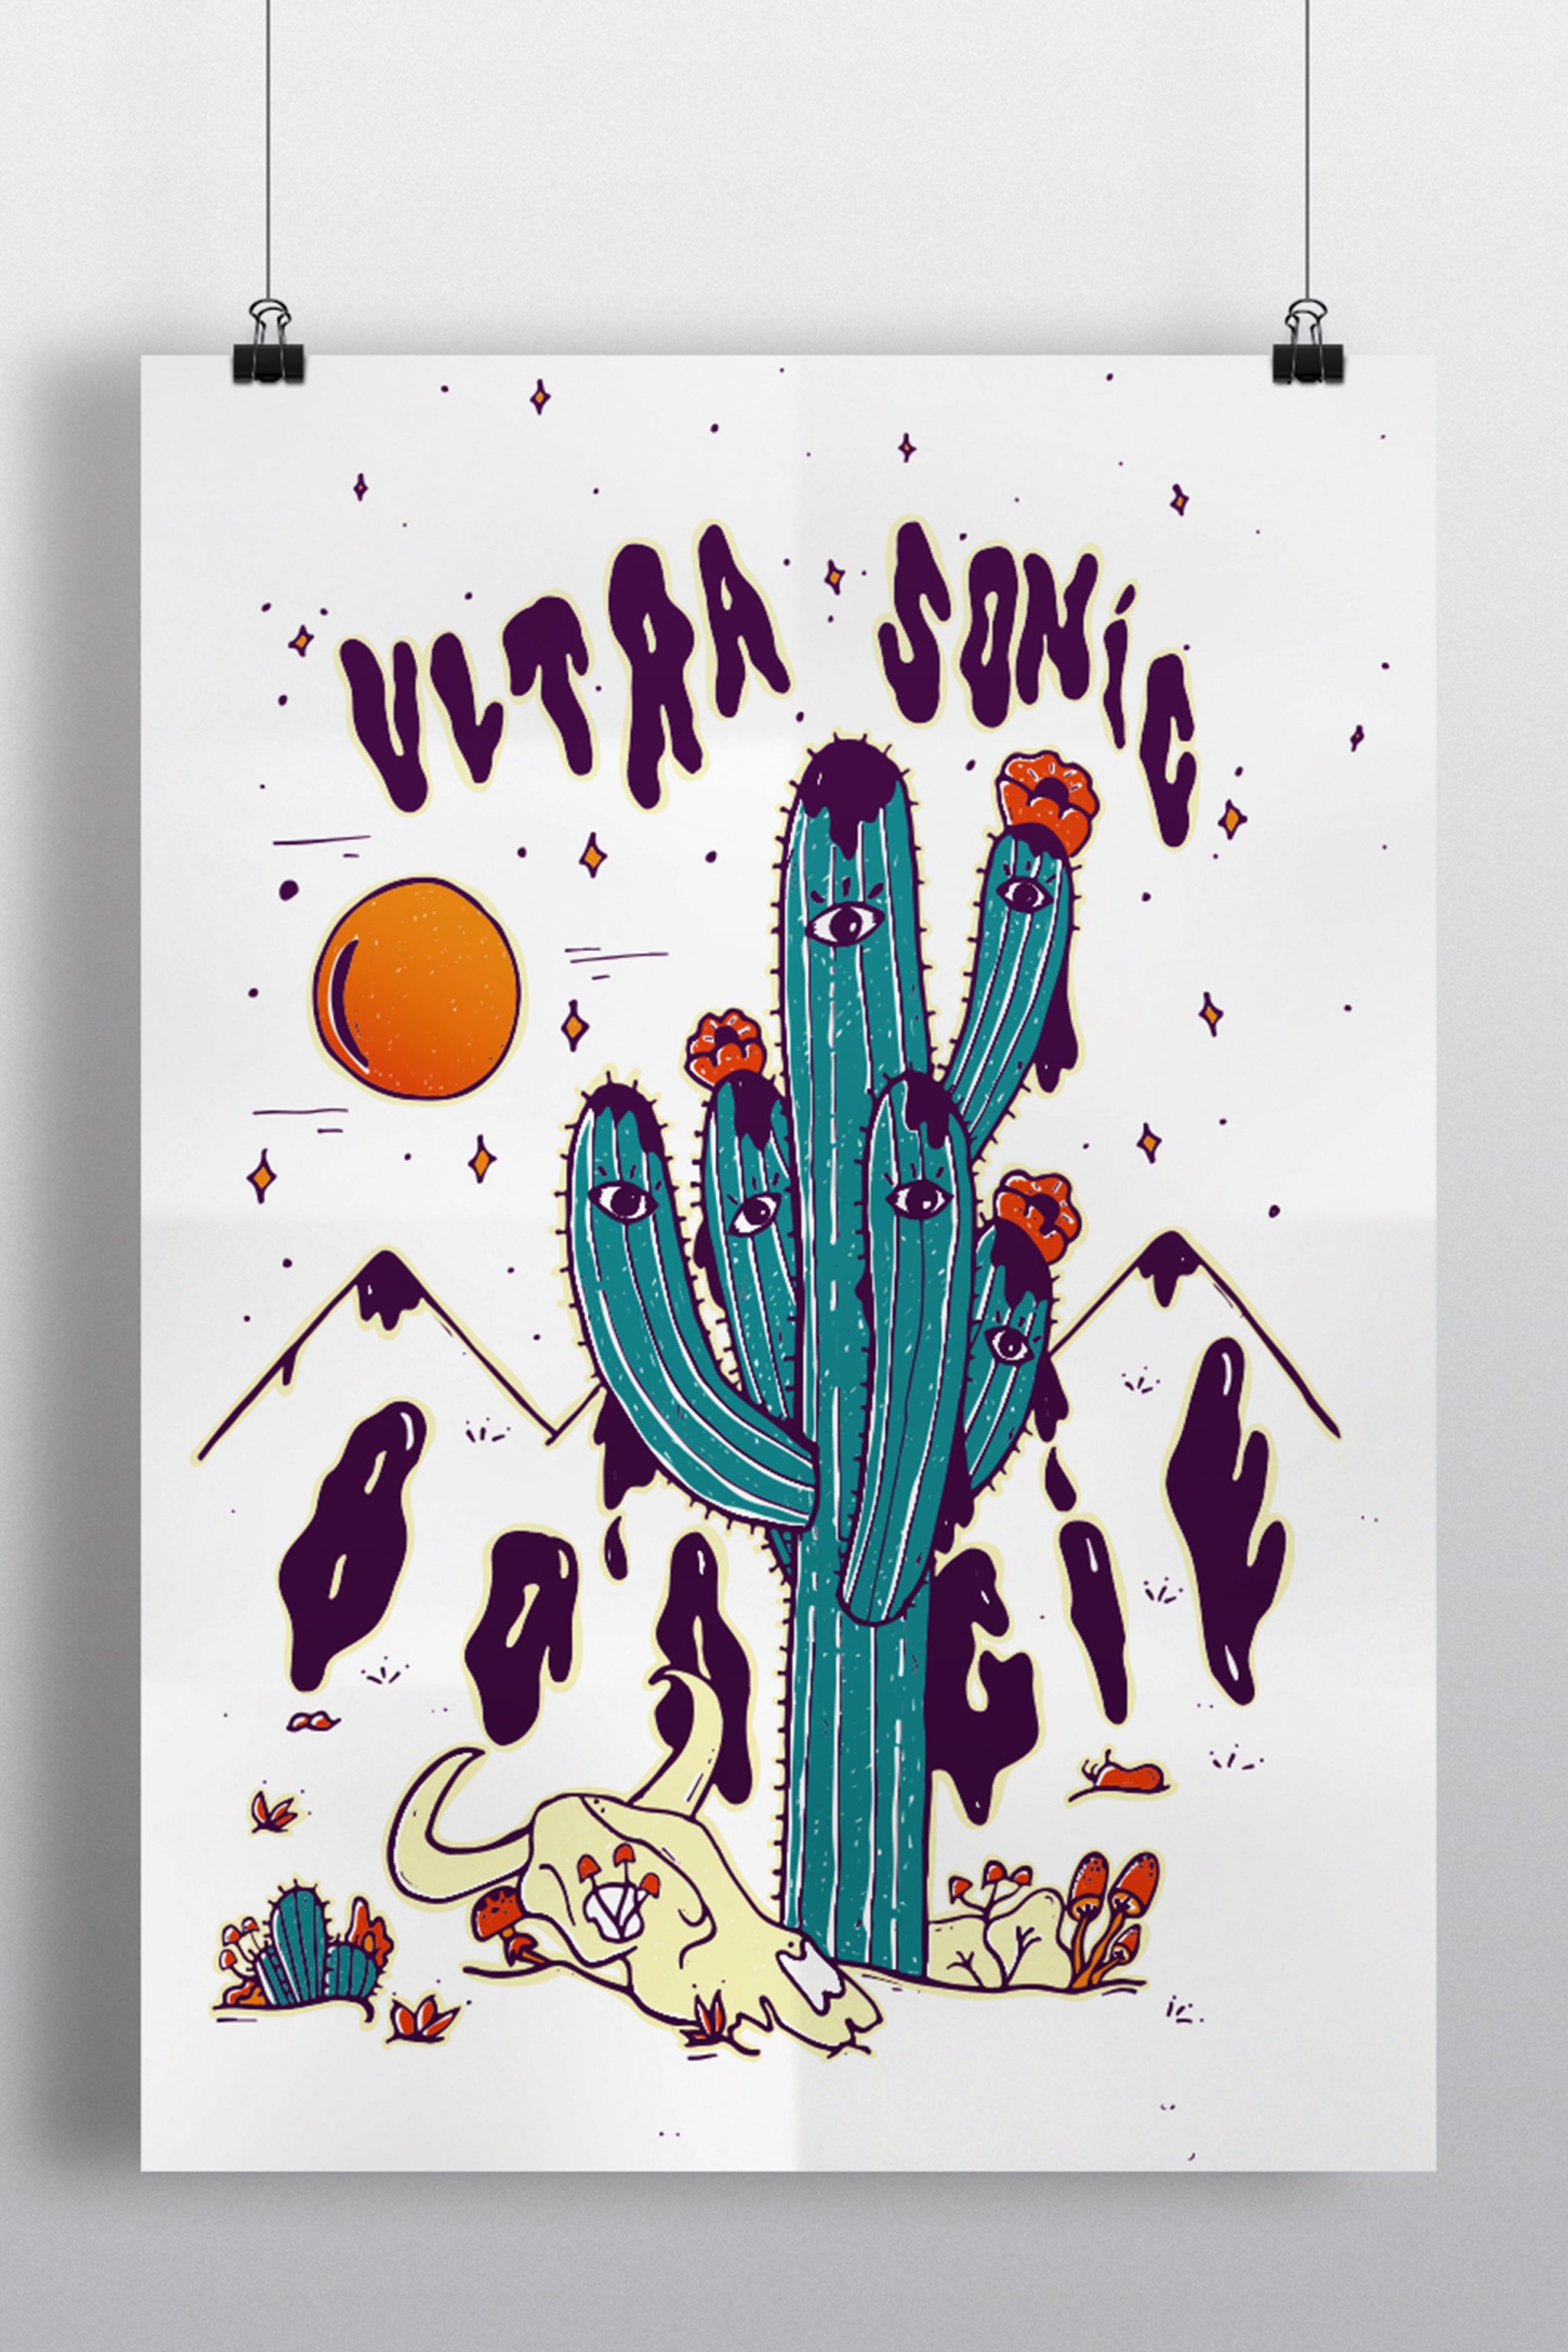 "ULTRA SONIC BOOGIE" POSTER